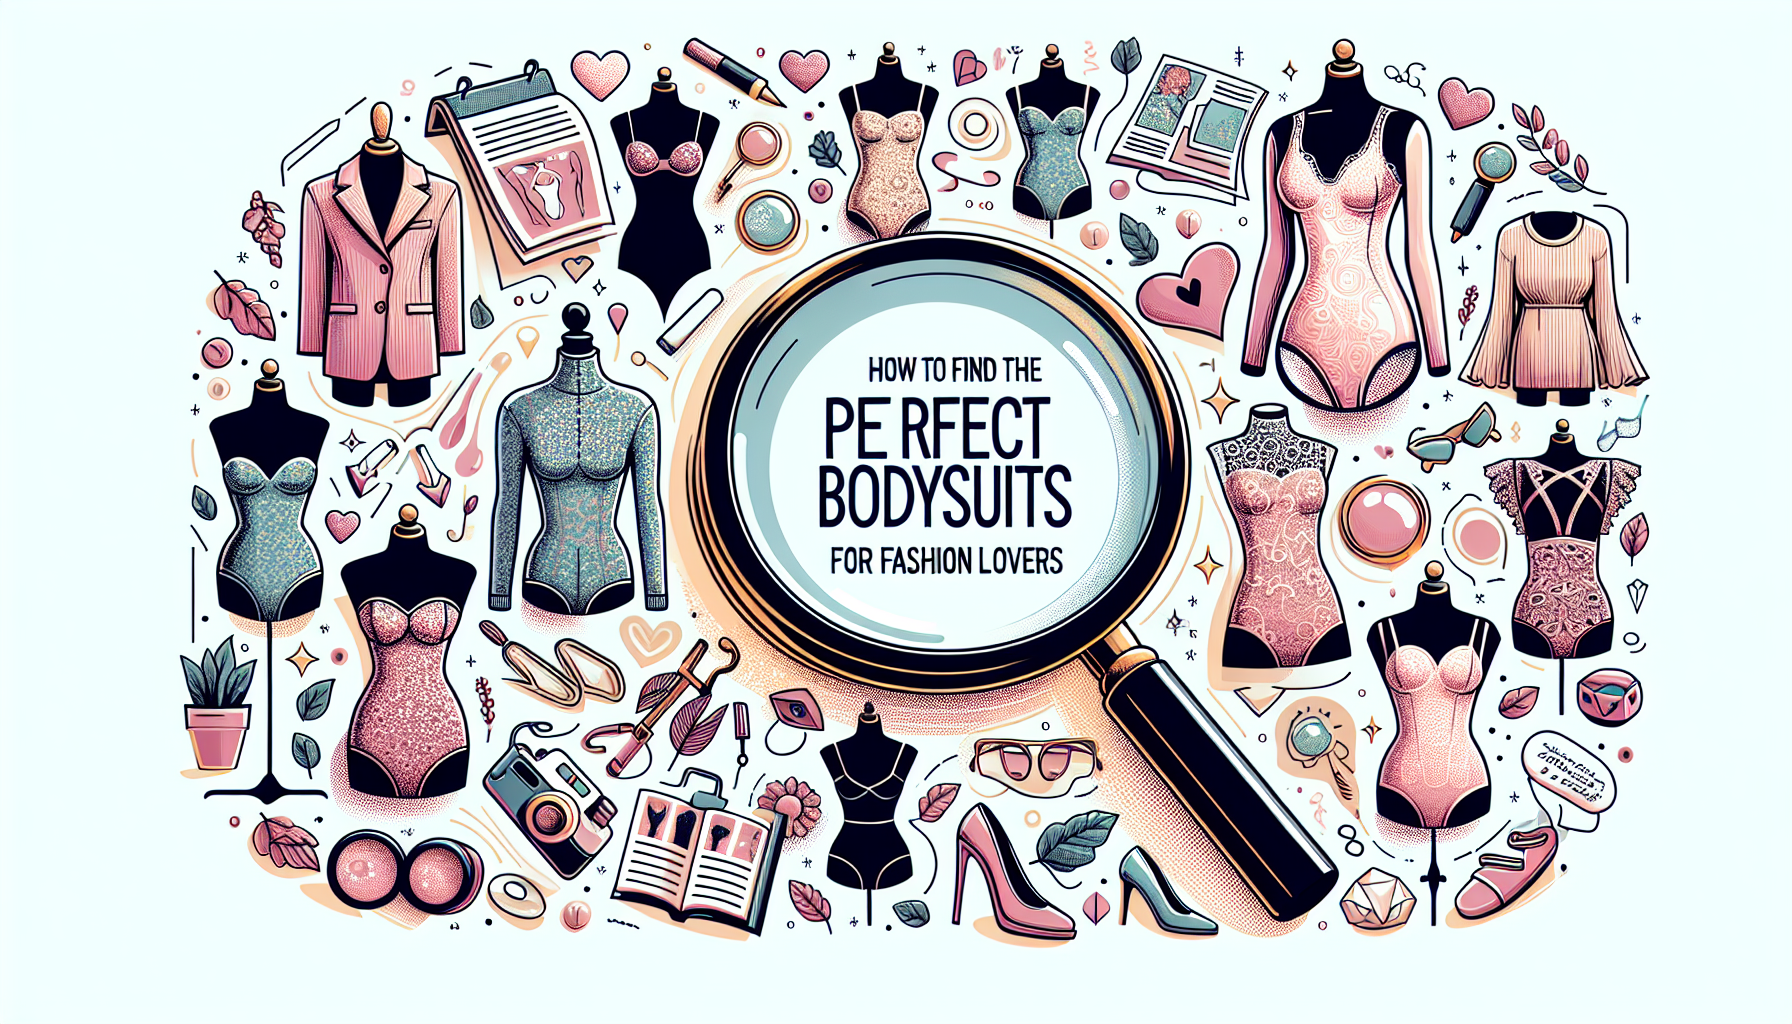 How to find the perfect bodysuits for fashion lovers